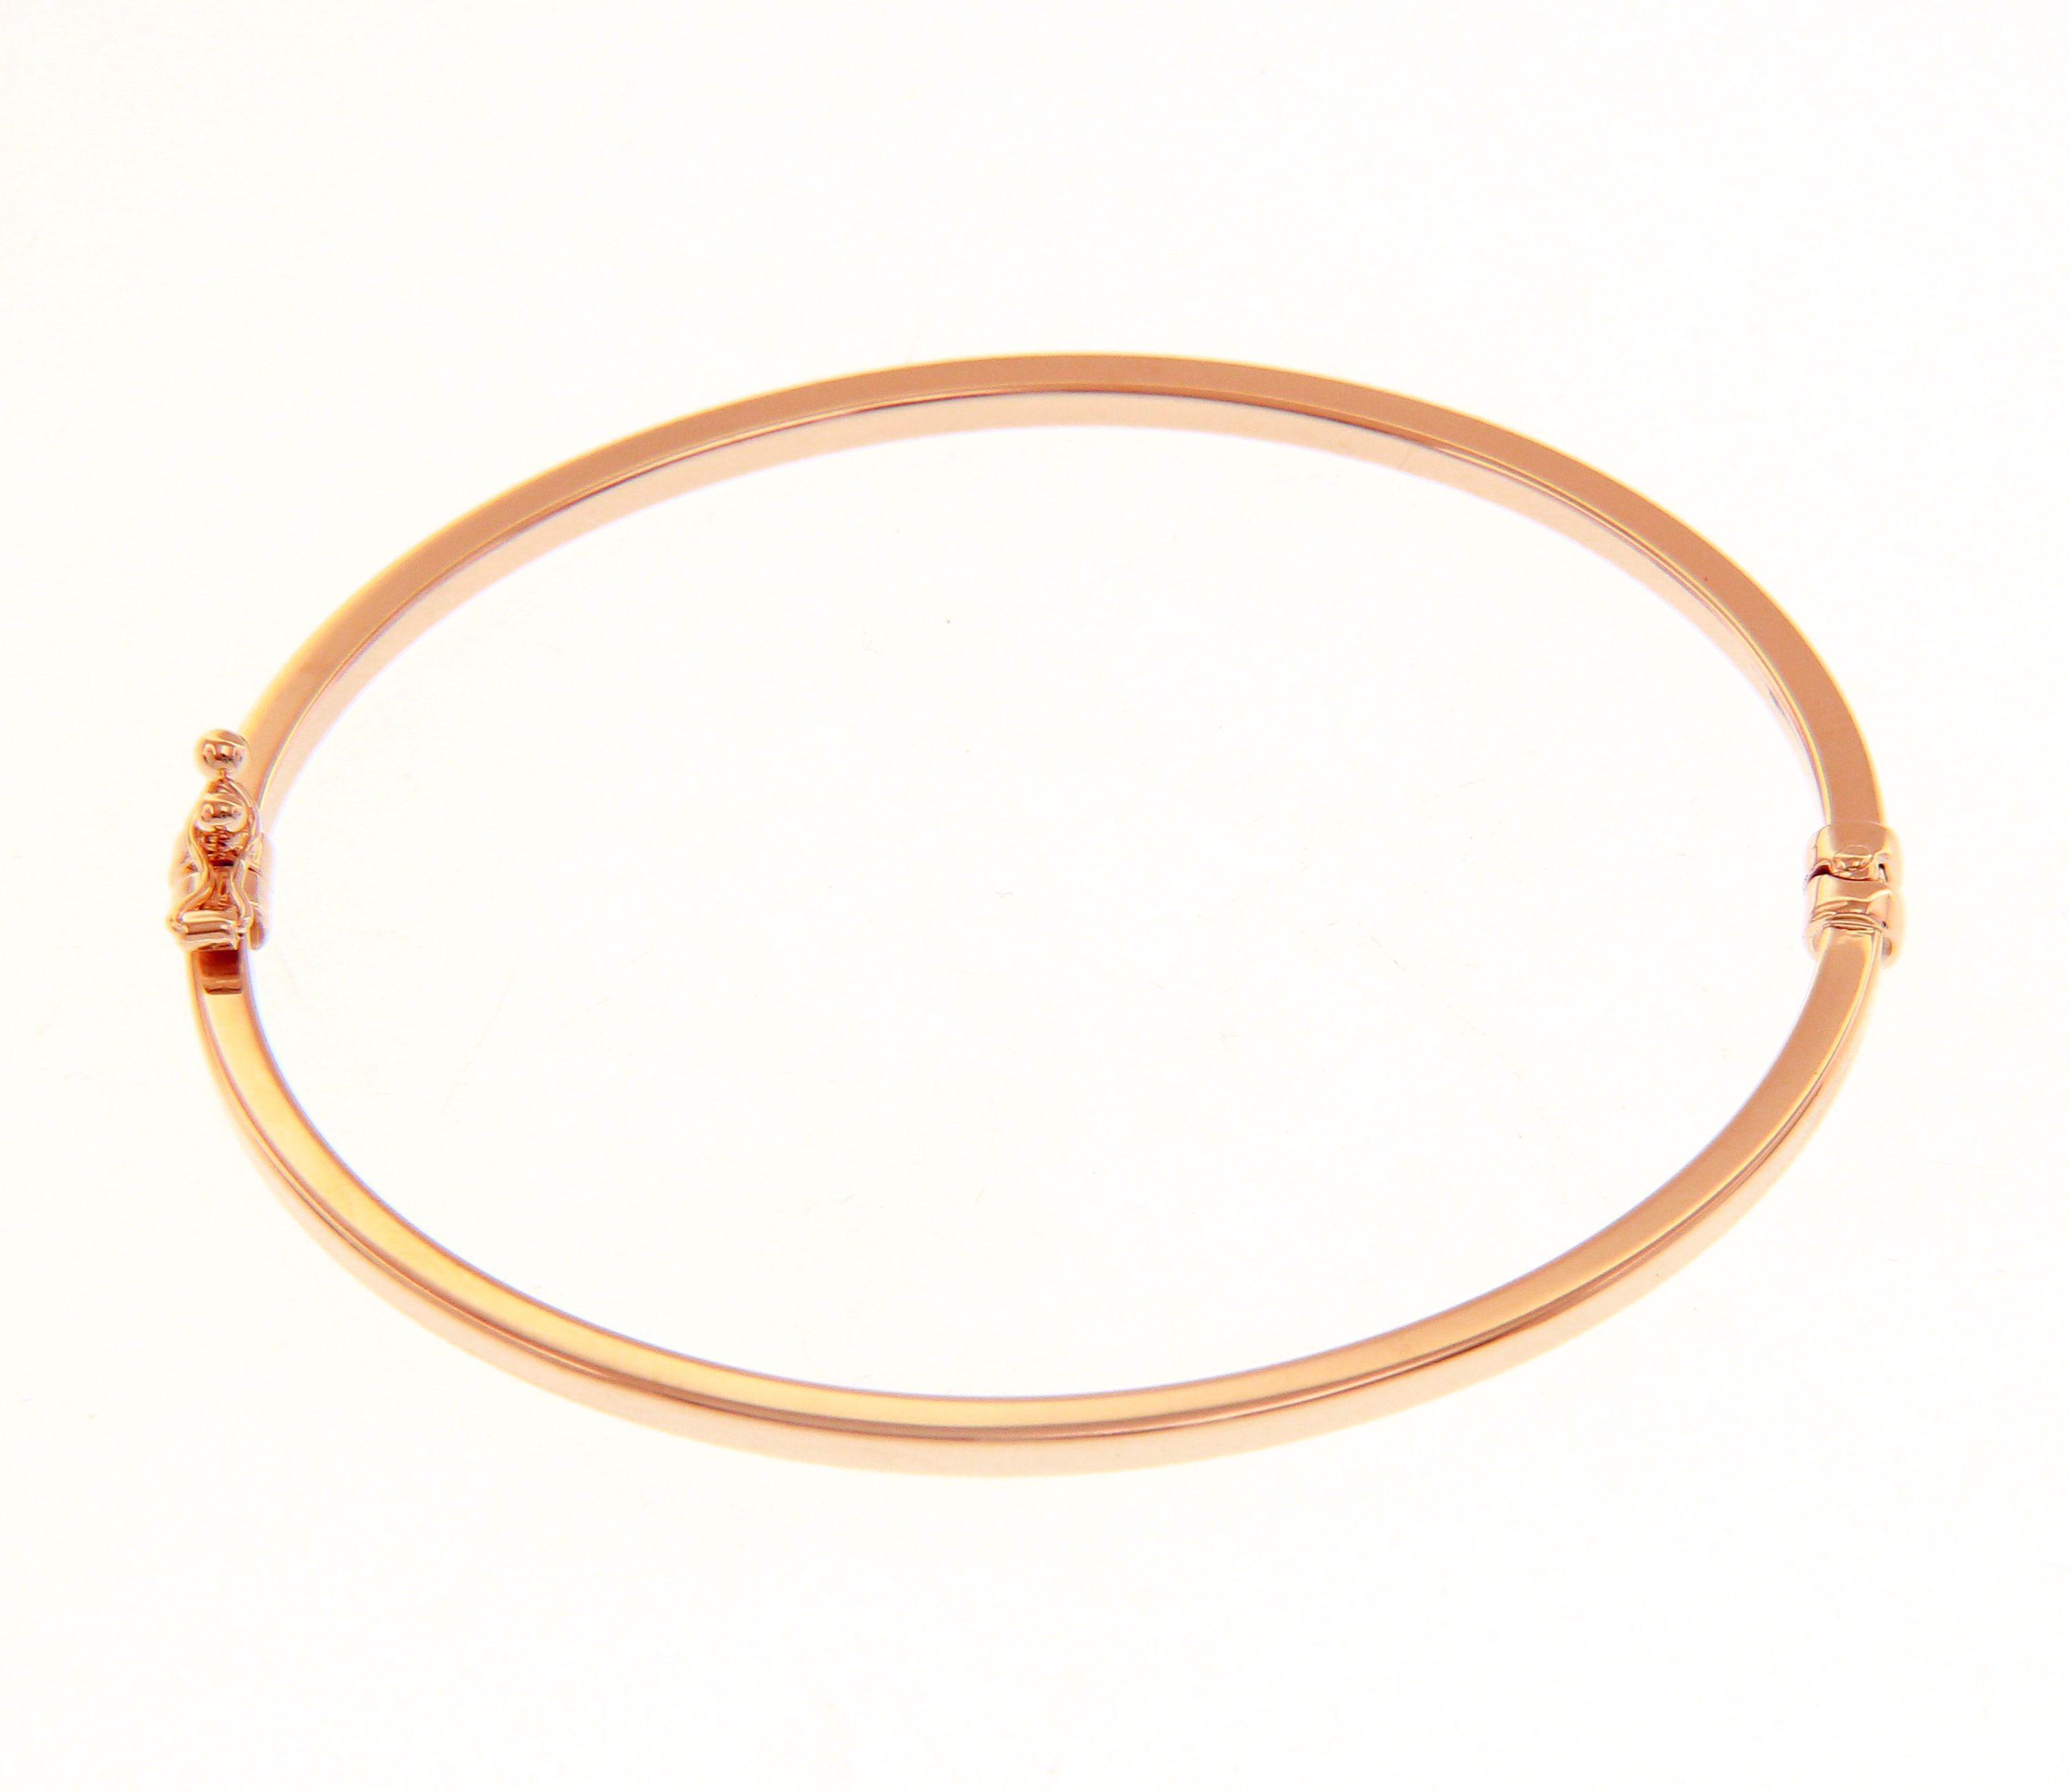 Rose gold oval bracelet with clasp k14 (code S219996)